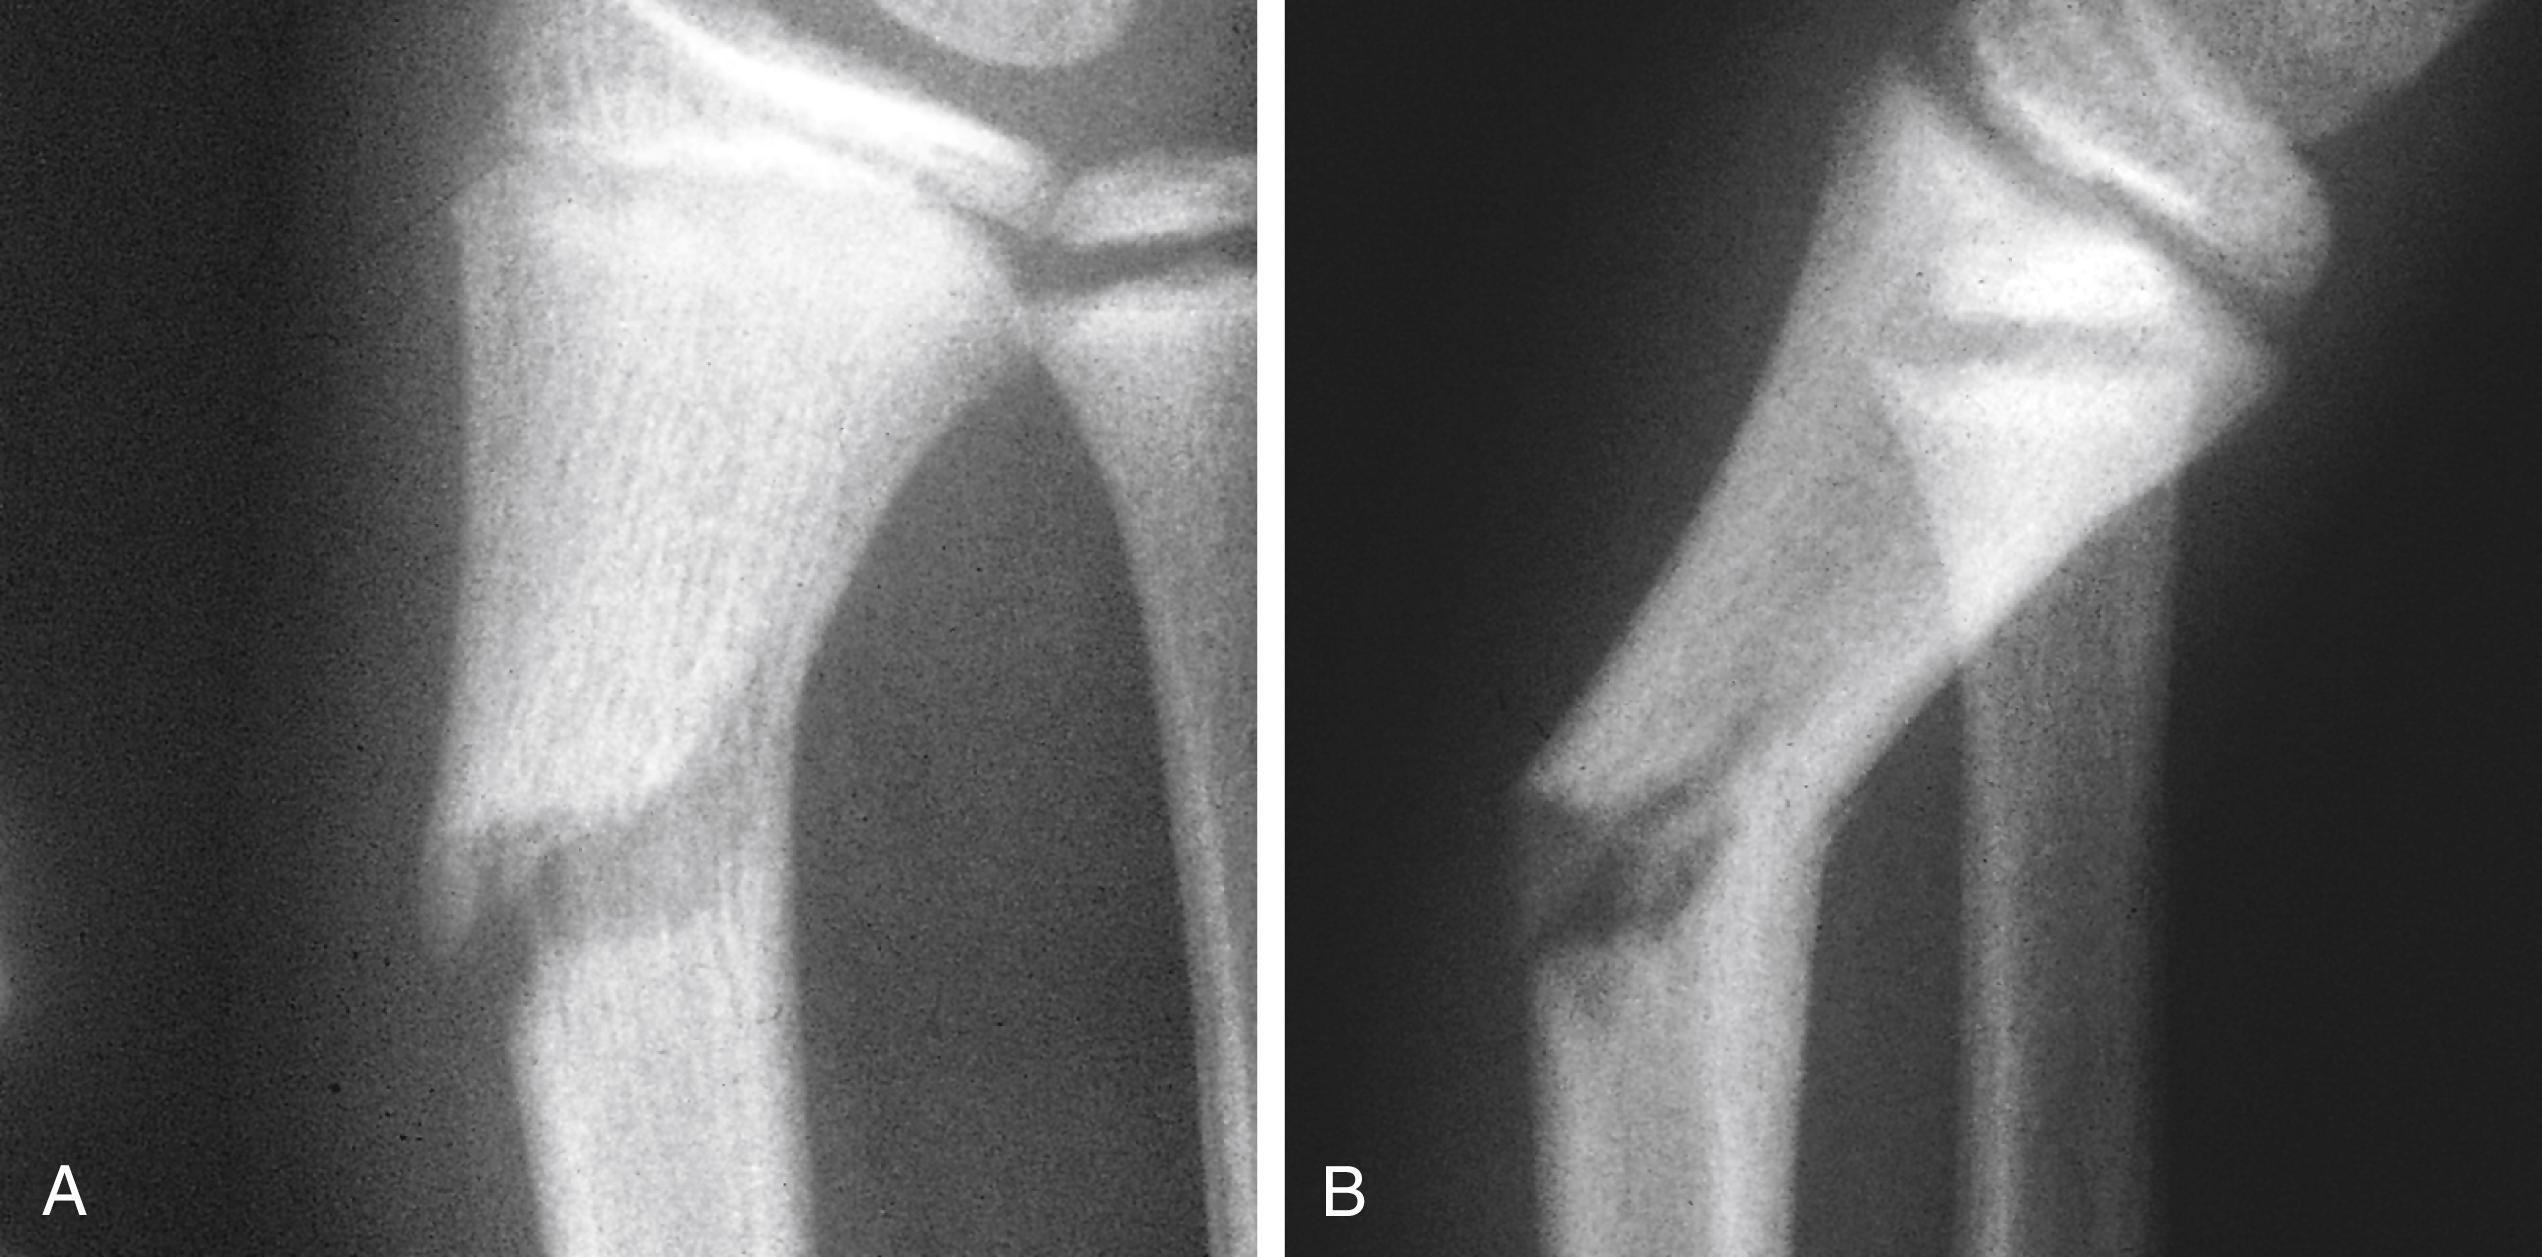 Fig. 22.26, Greenstick fracture of the distal radius. (A) In this anteroposterior view of the distal radius, a fracture line is seen that is complete except for a portion of the cortex on the compression side of the fracture. (B) The lateral radiograph demonstrates more clearly the disrupted and compressed cortices. This resulted from a fall on the outstretched arm with the wrist in dorsiflexion.